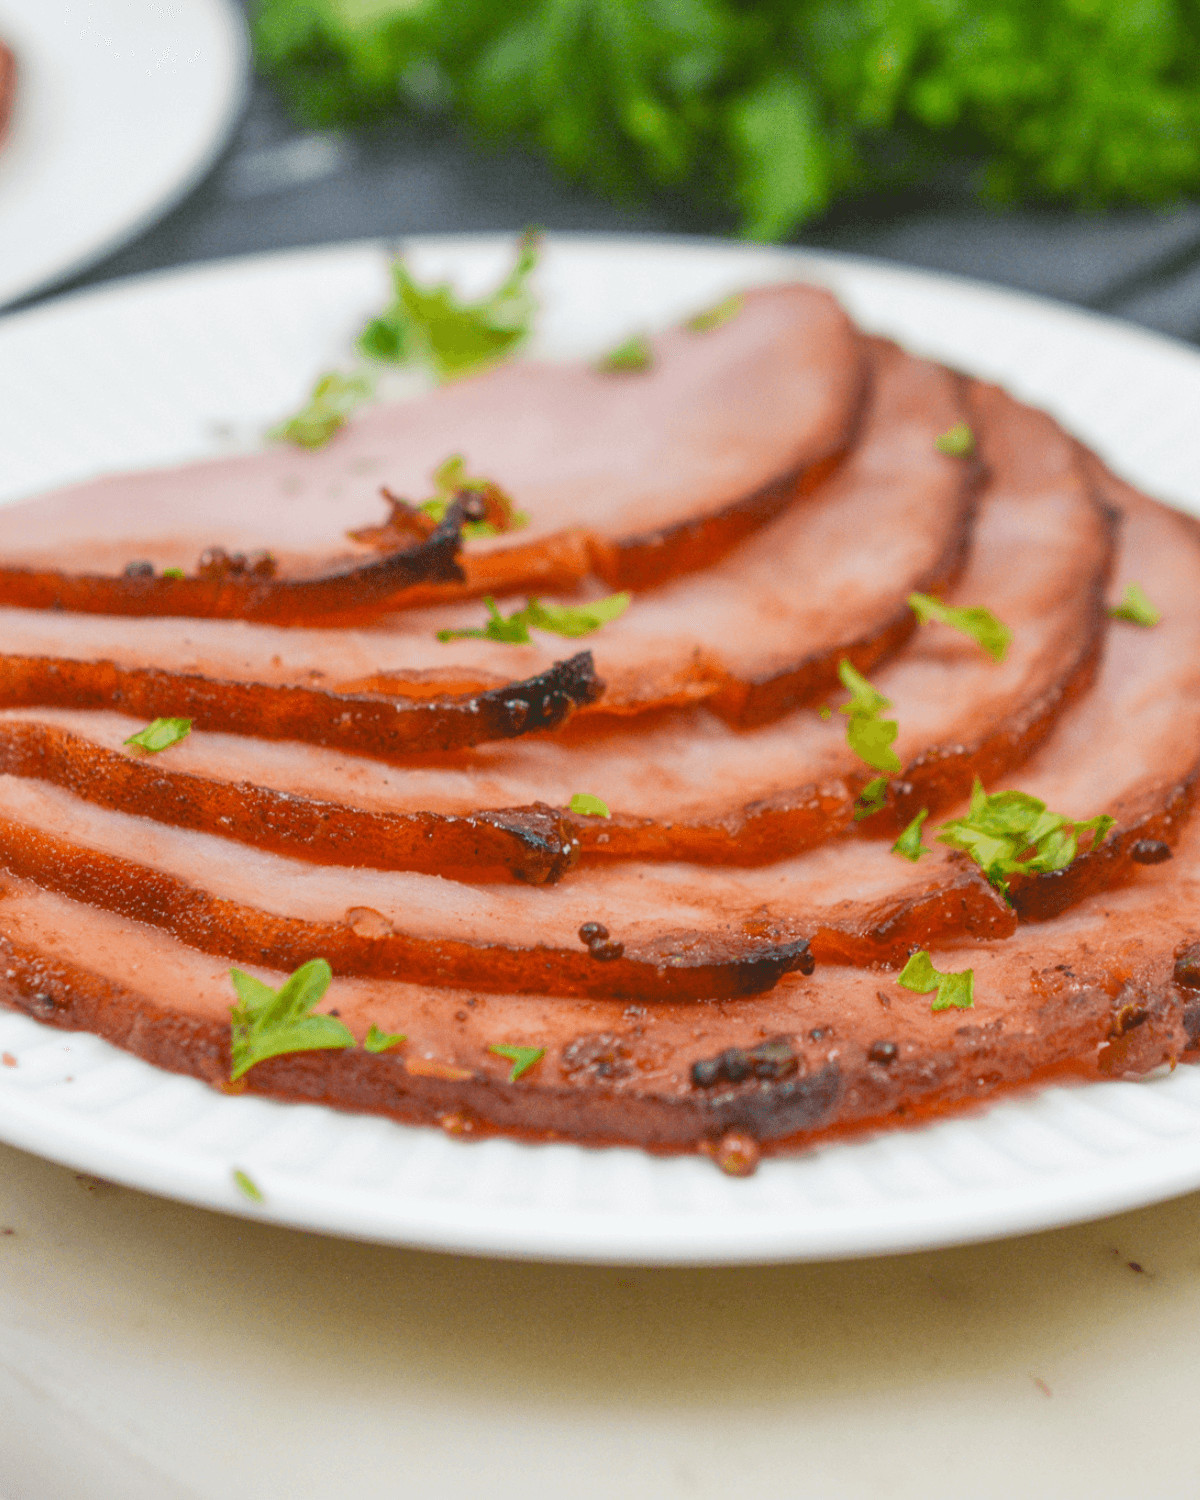 Sliced air fryer ham garnished with parsley on a white plate.